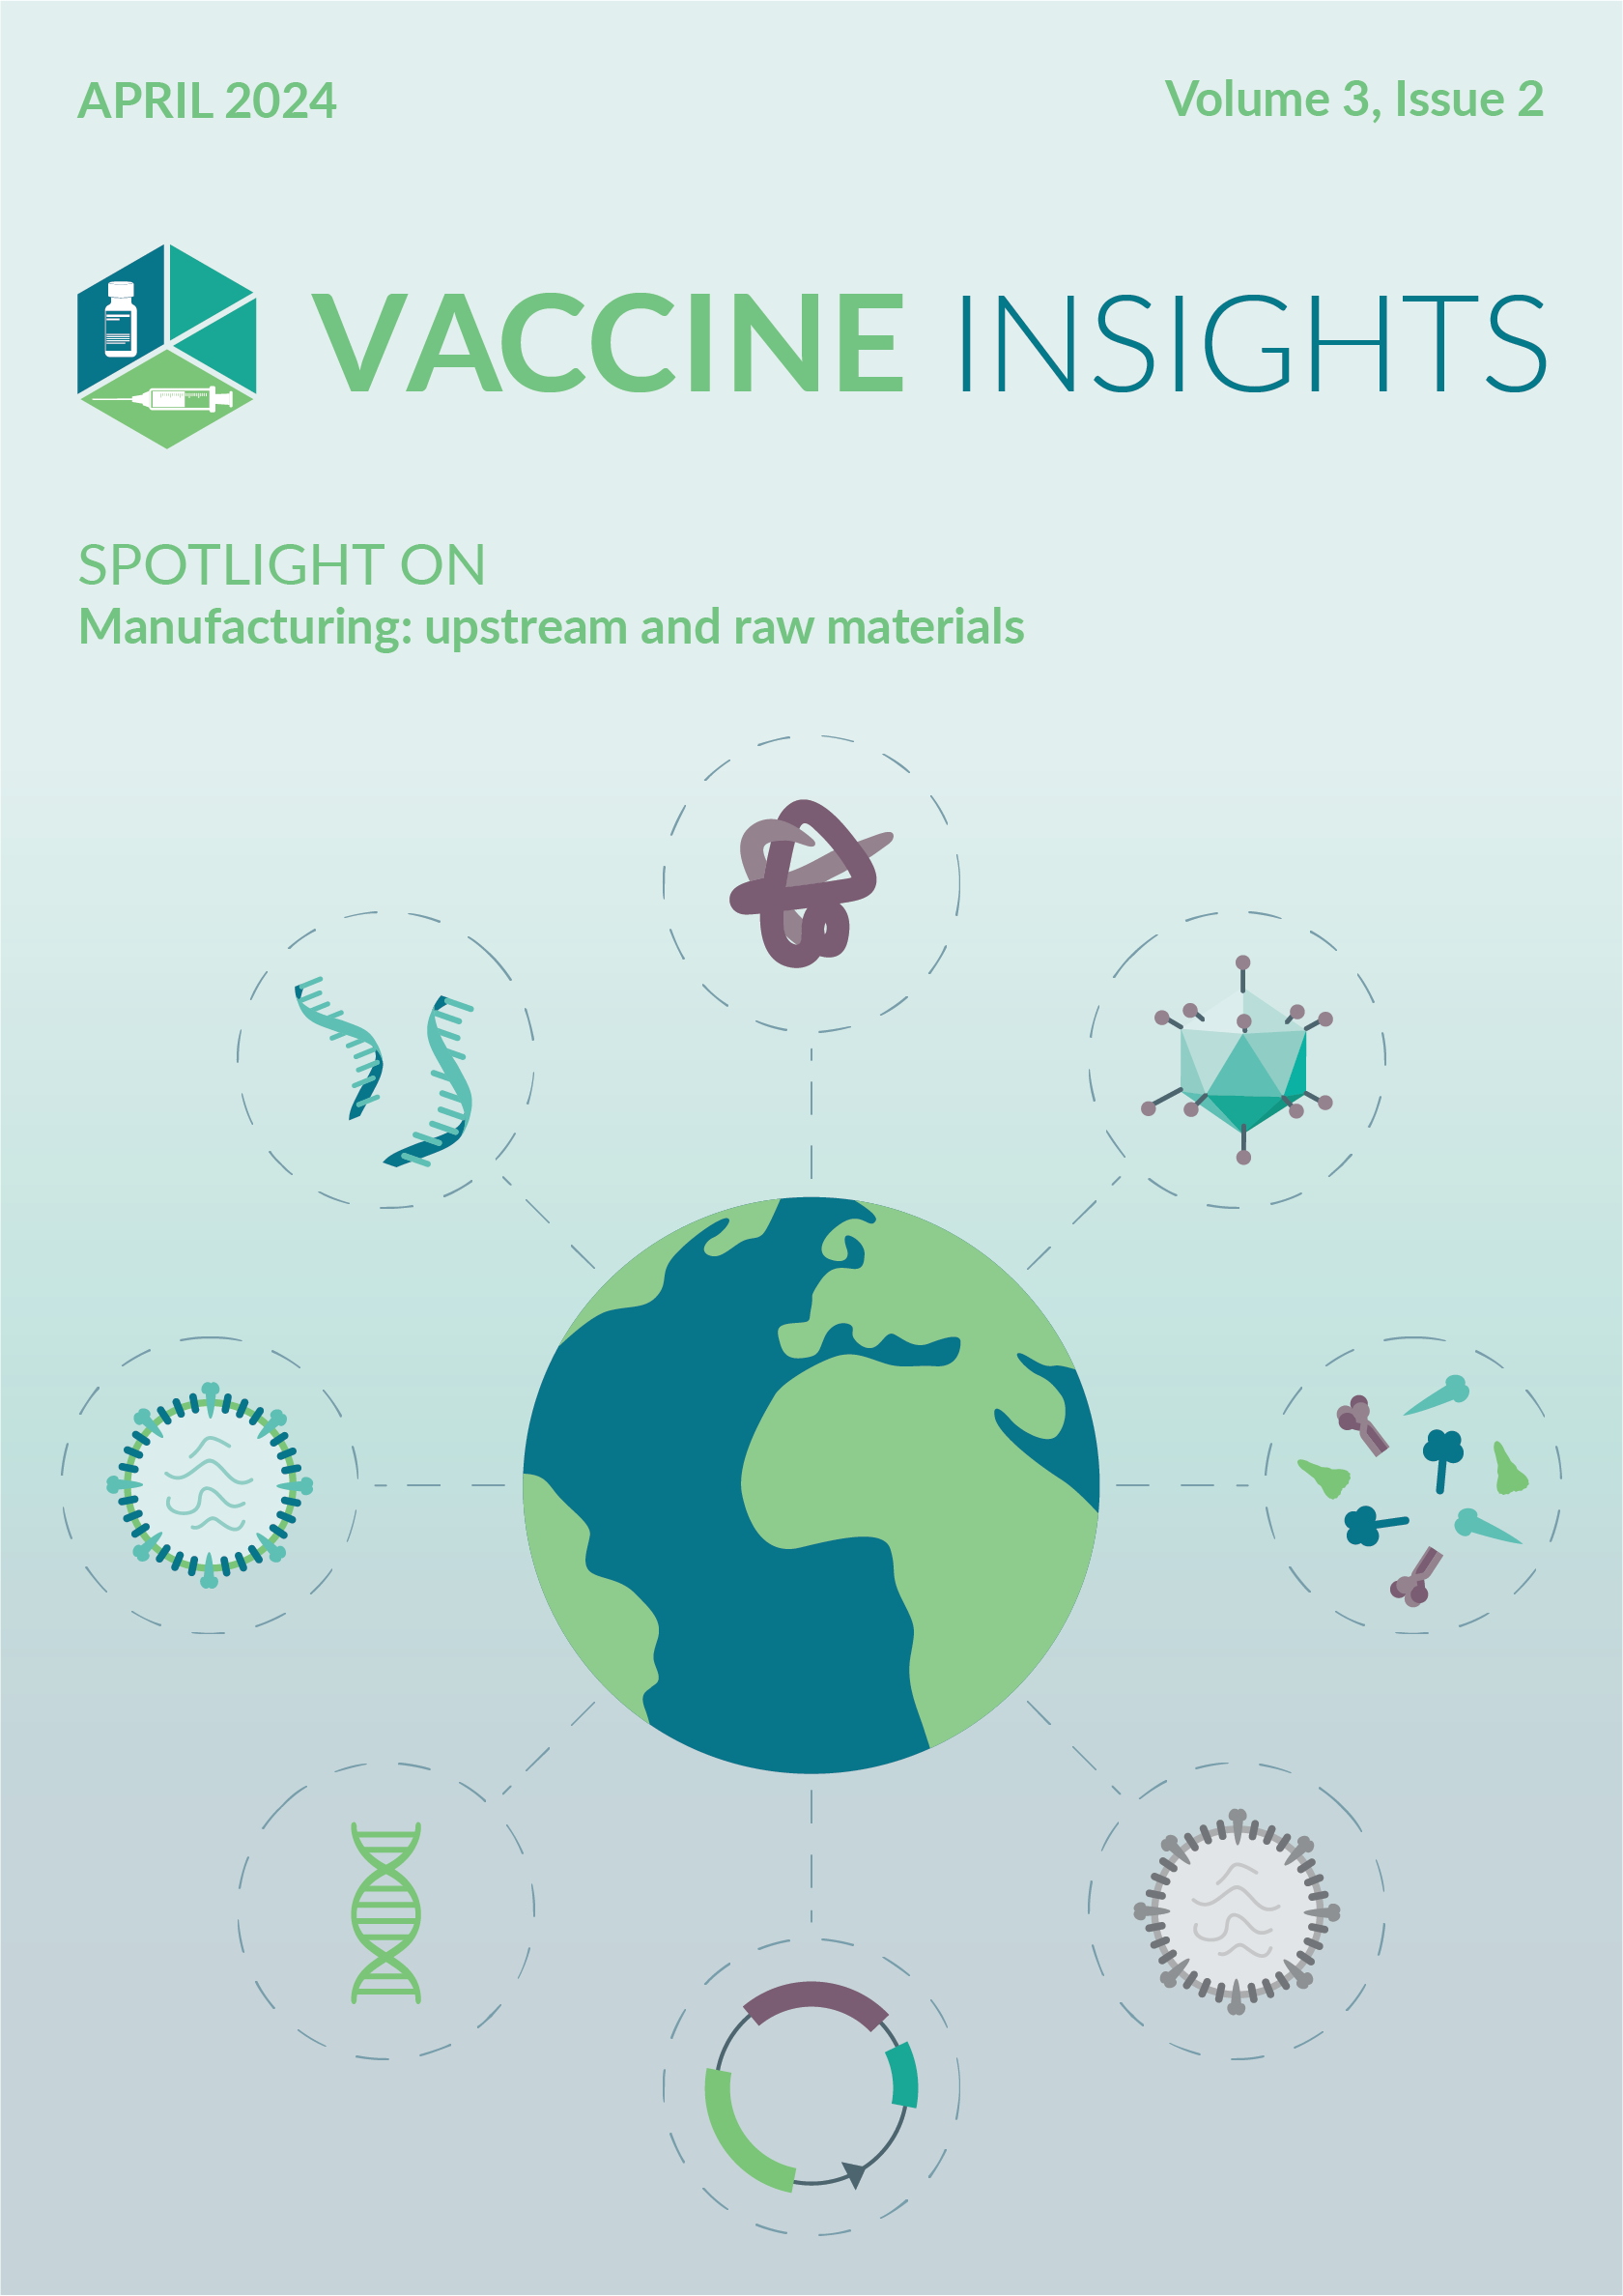 Vaccine Insights Vol 3 Issue 2